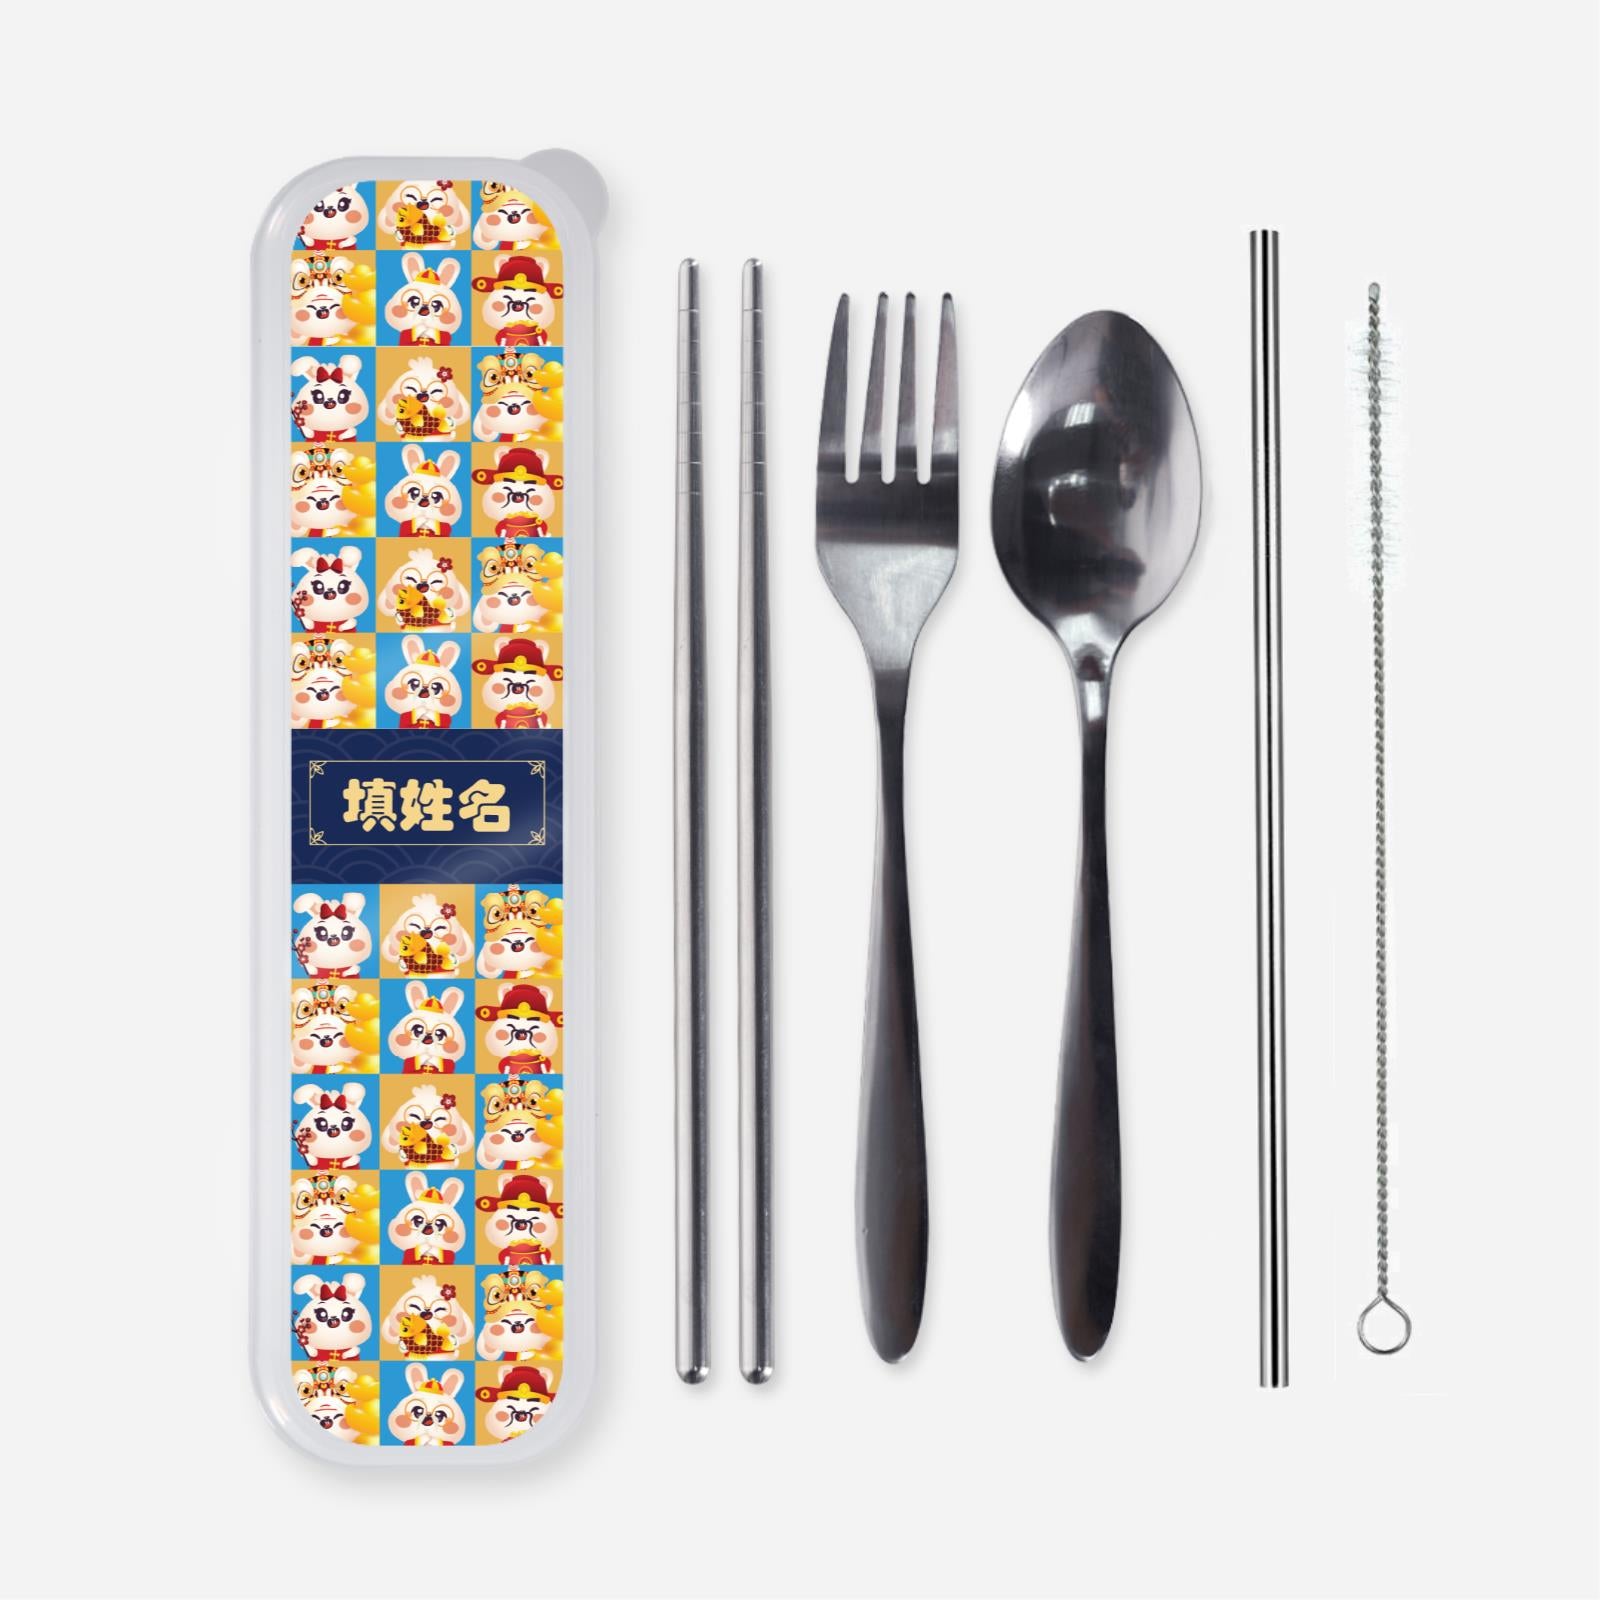 Cny Rabbit Family - Rabbit Family Blue Cutlery With Chinese Personalization